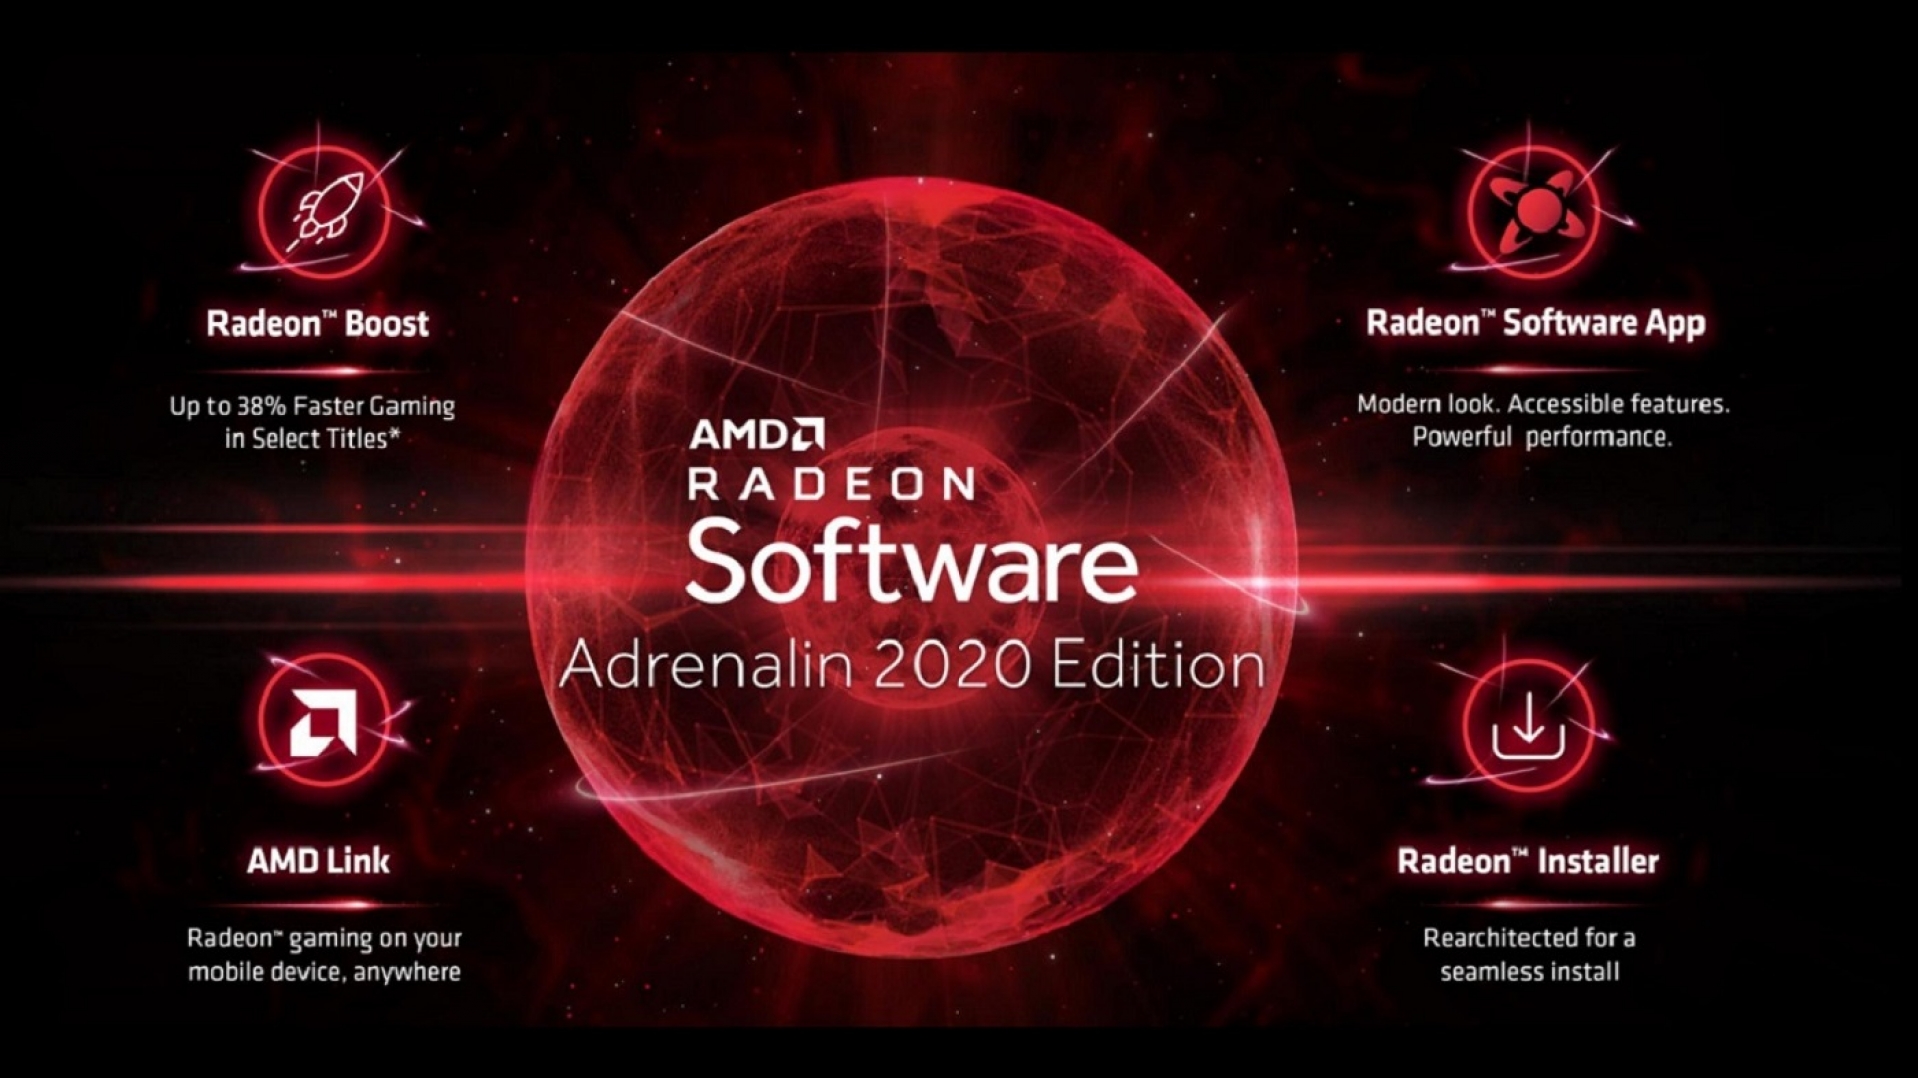 amd mobility radeon hd 5000 driver windows 10 hdmi issues